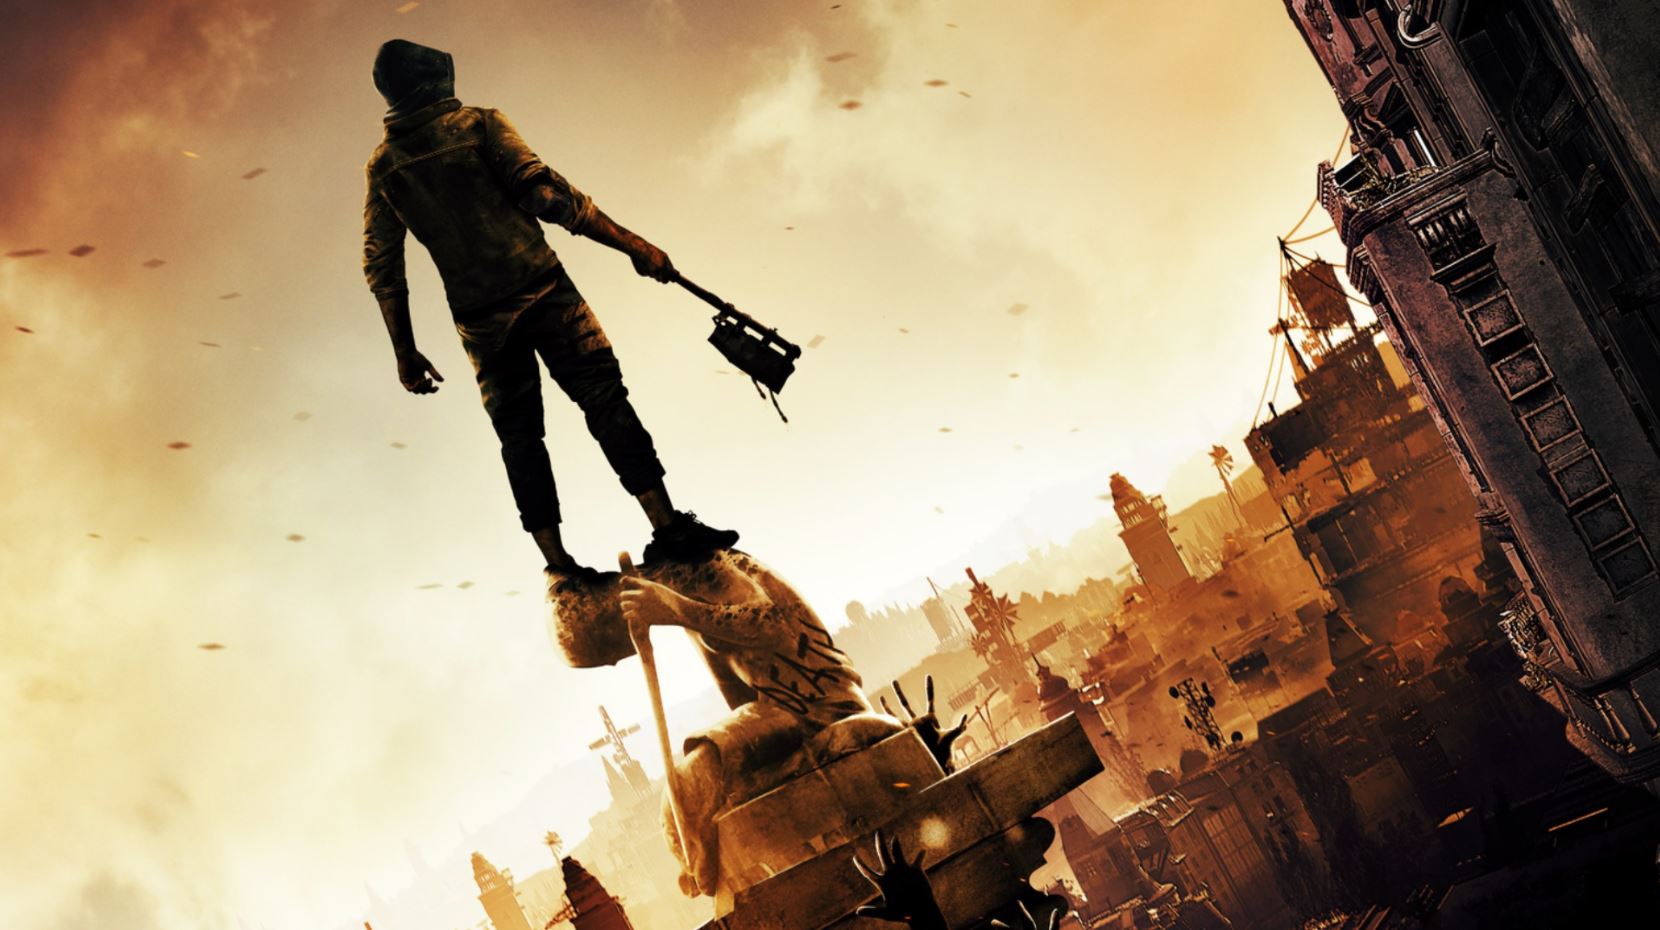 Dying Light 2 Collector’s Edition leaks, suggests release information and news soon